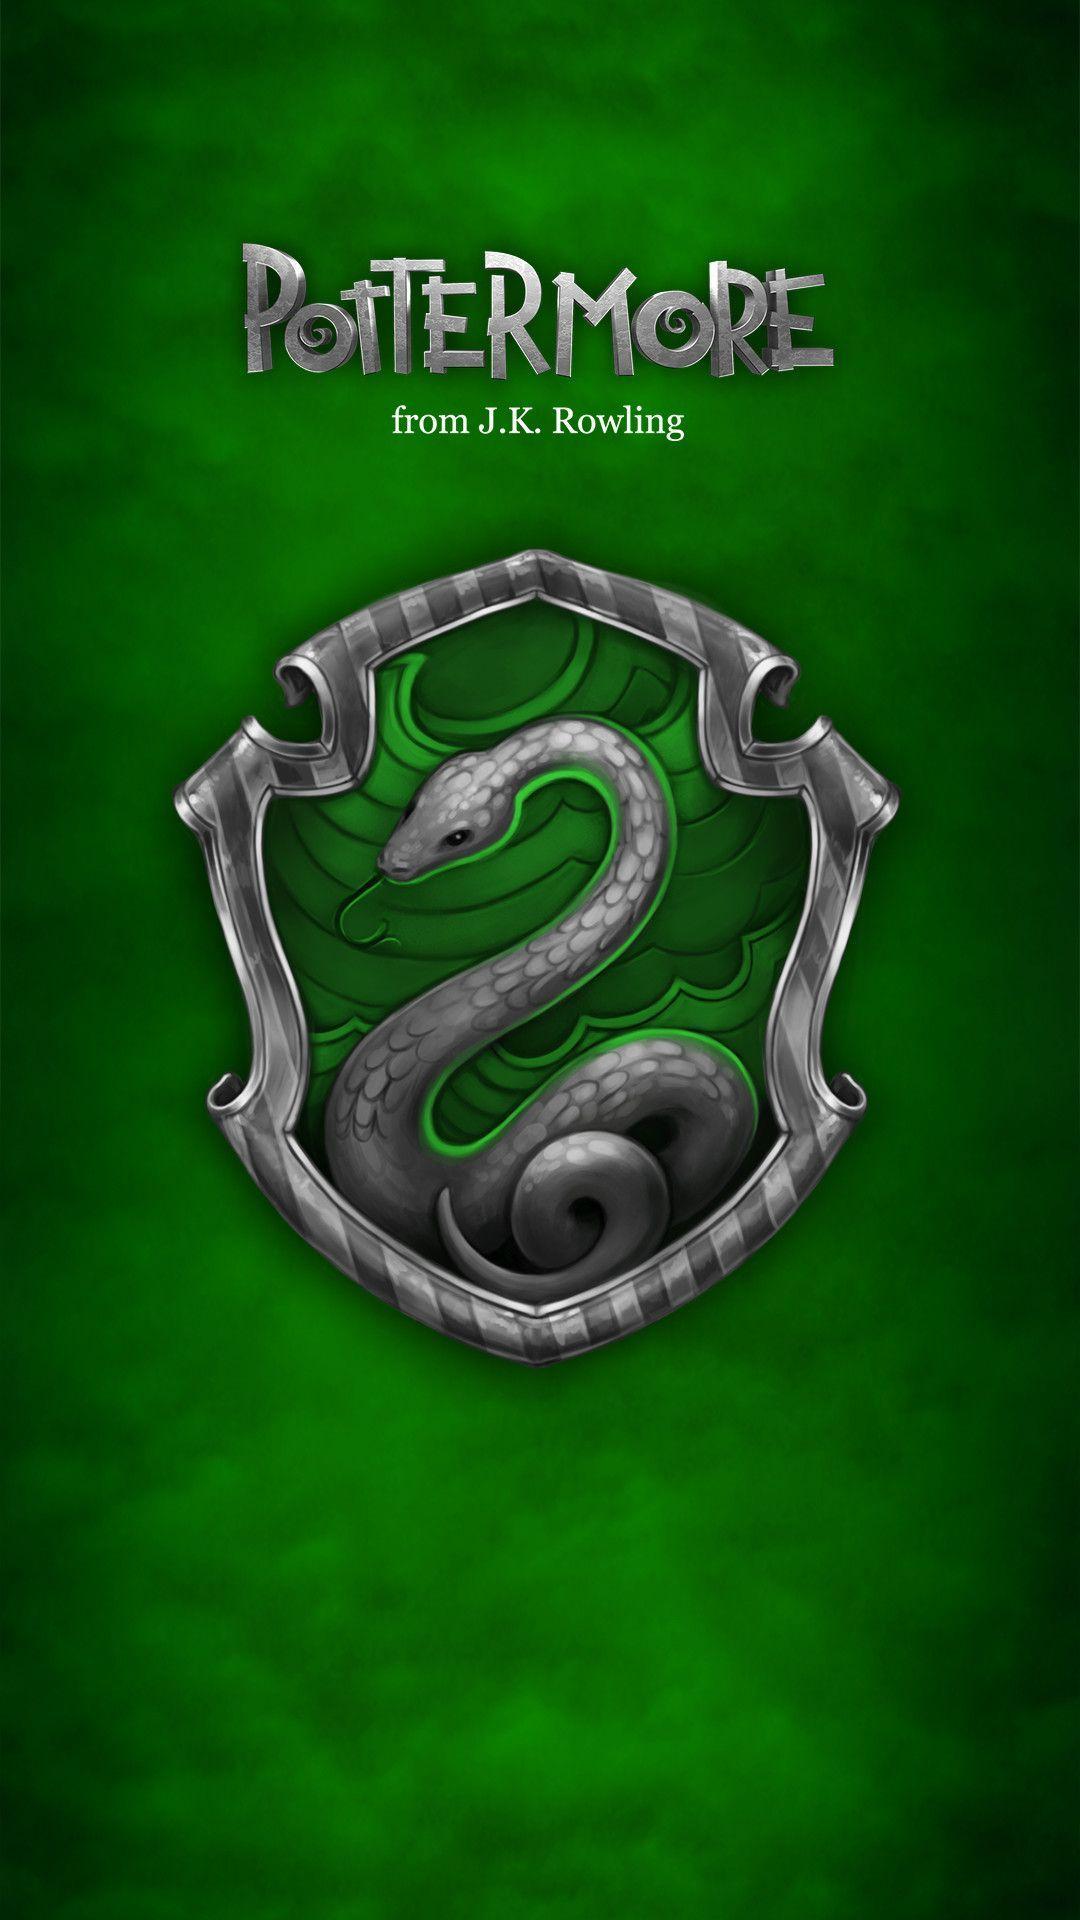 30 Free Slytherin Backgrounds for your iPhone  Prada  Pearls  Slytherin  wallpaper Slytherin Slytherin crest